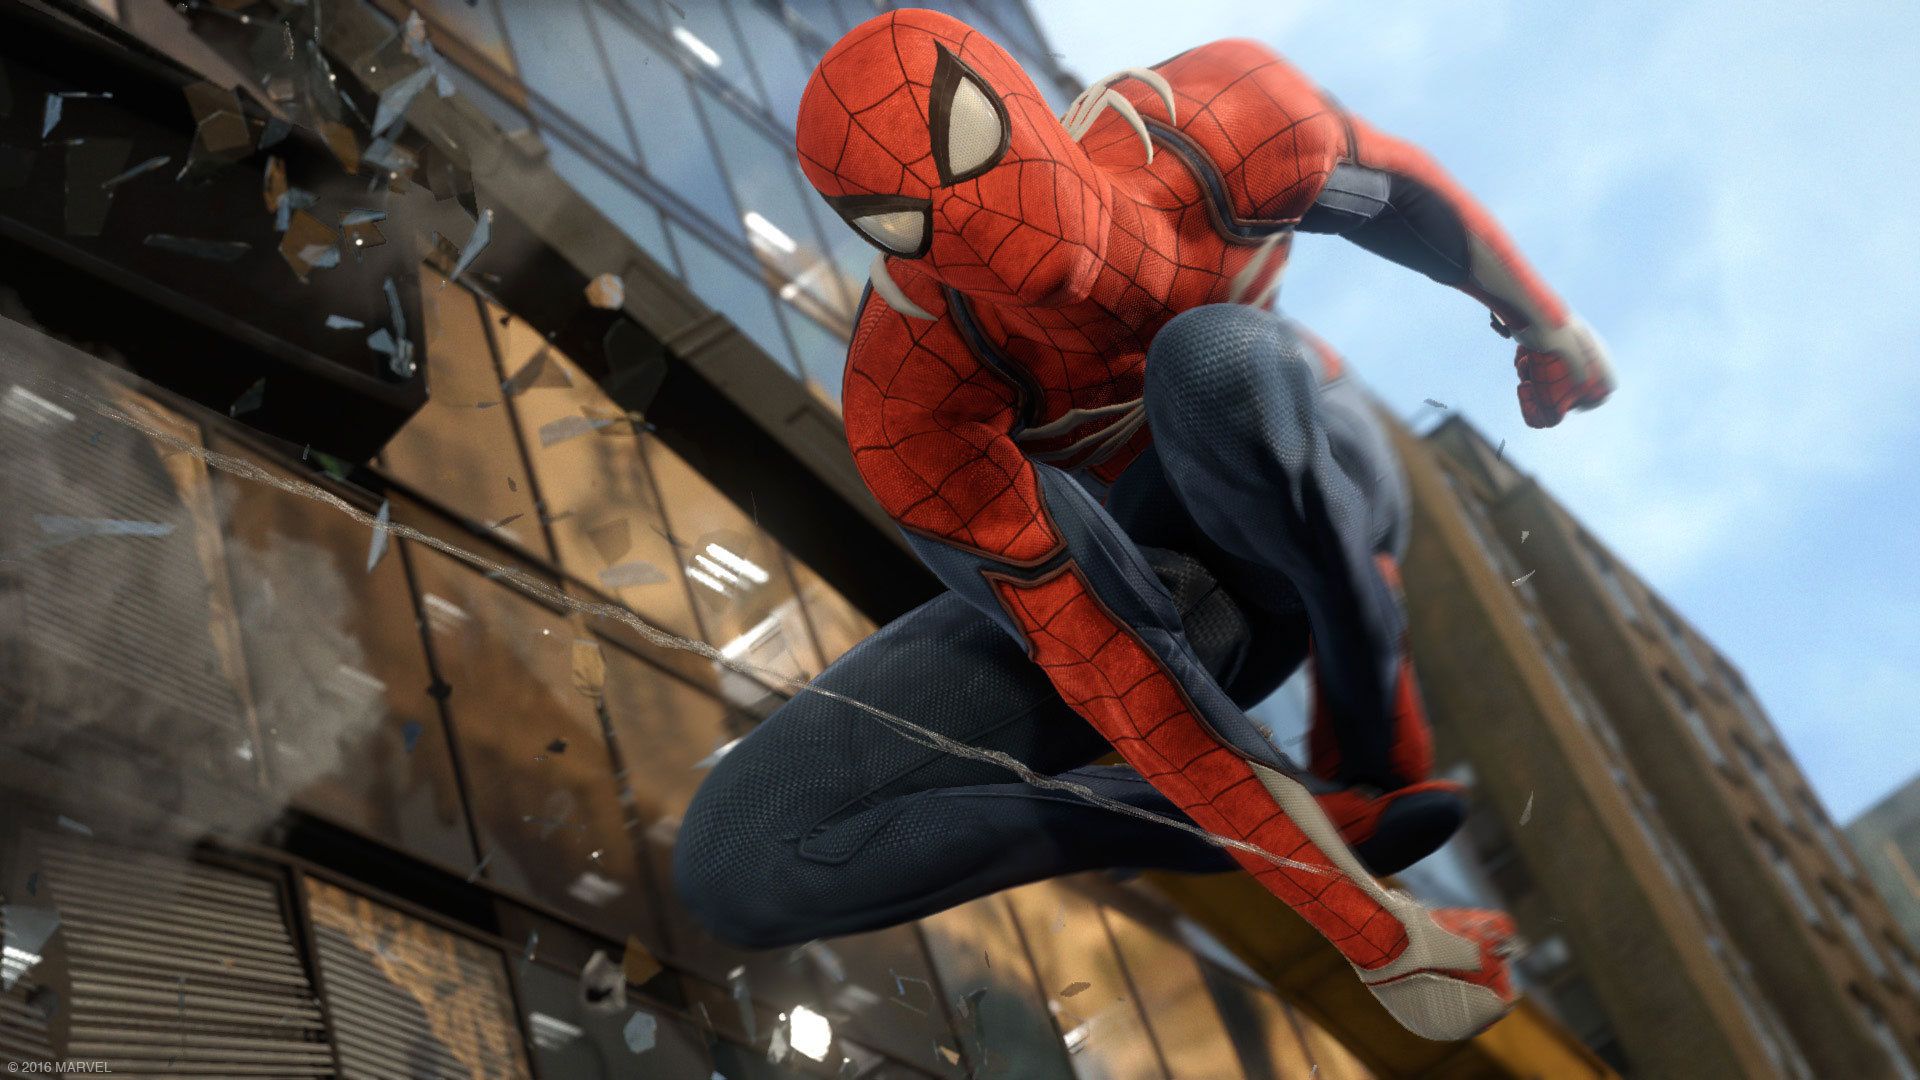 Marvel's Spider Man, It Will Not Be Possible To Upgrade From PS4 To The Remastered For PlayStation 5 Let's Talk About Video Games